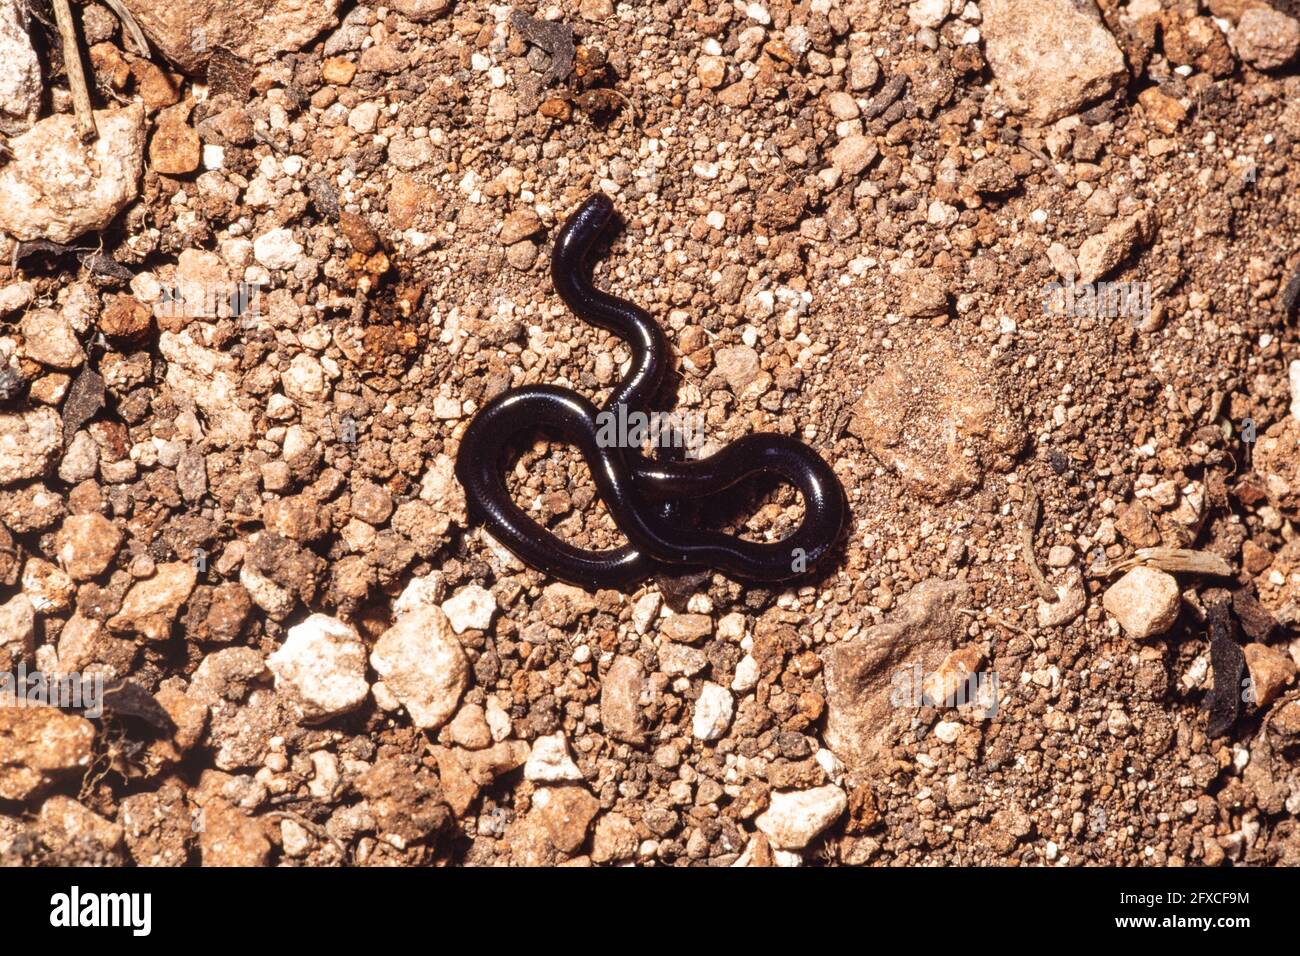 The Brahminy Blind Snake resembles an earth worm and is an introduced species on the island of Guam in the Northern Mariana Islands. Stock Photo